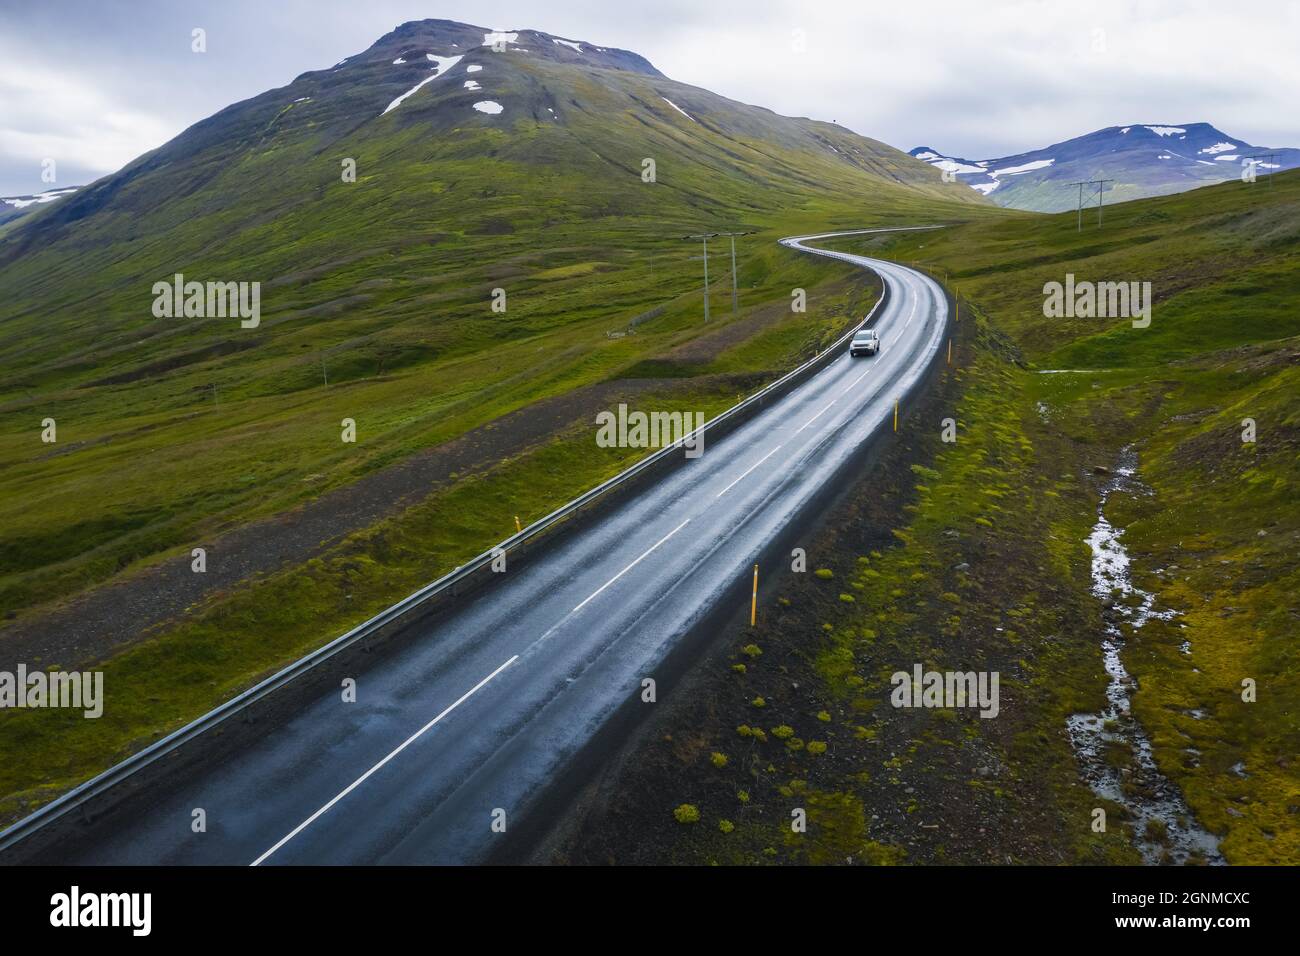 Lonely car drive on beautiful remote road, travel background, aerial scenic landscape from Iceland Stock Photo